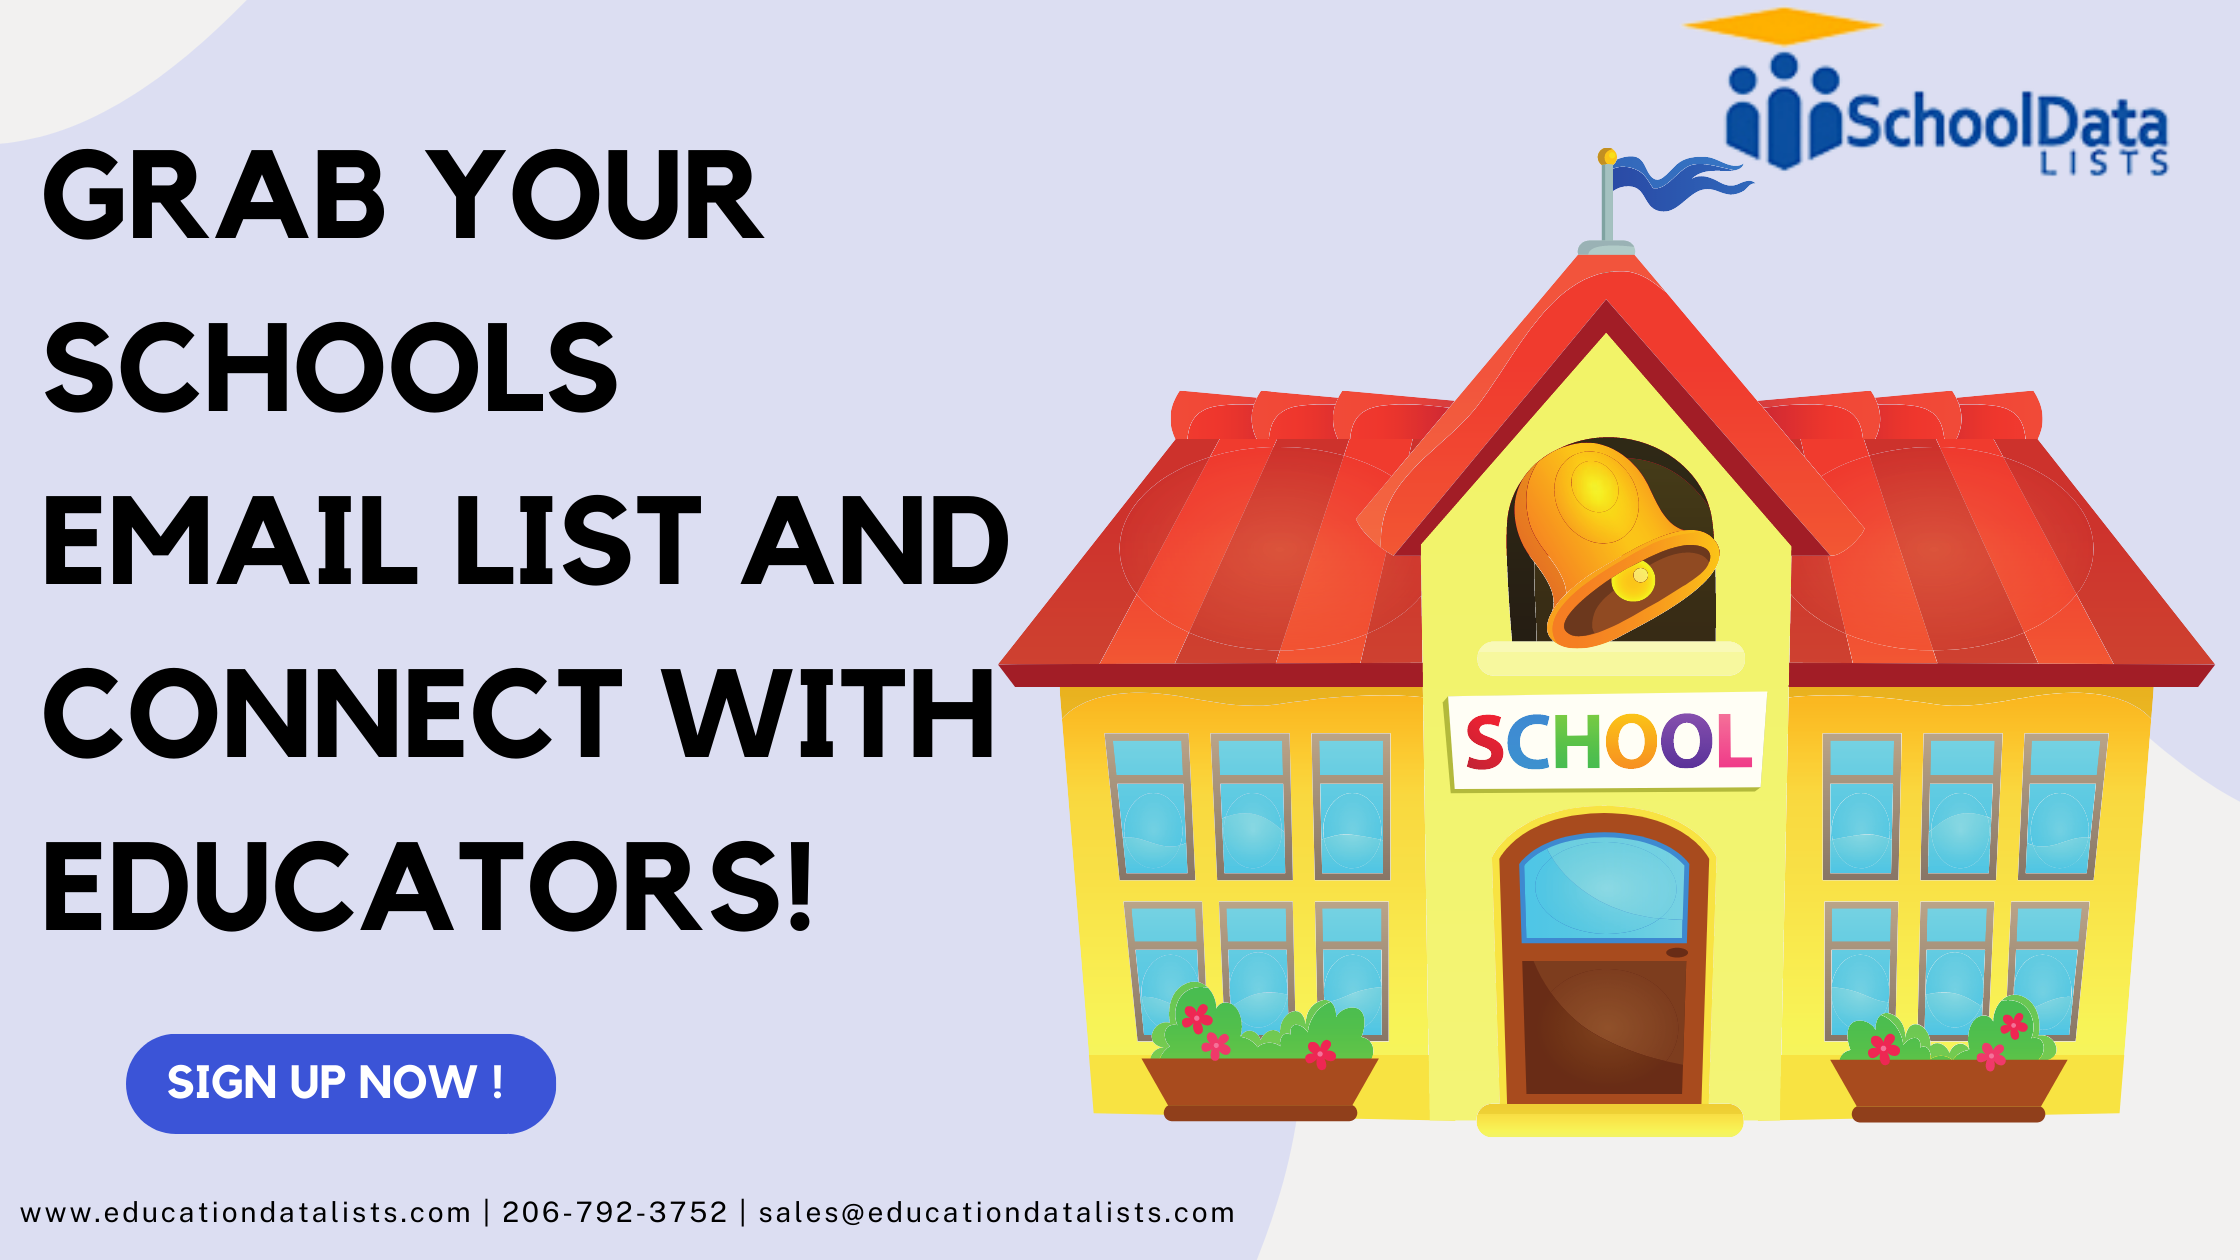 Grab Your Schools Email List and Connect with Educators!